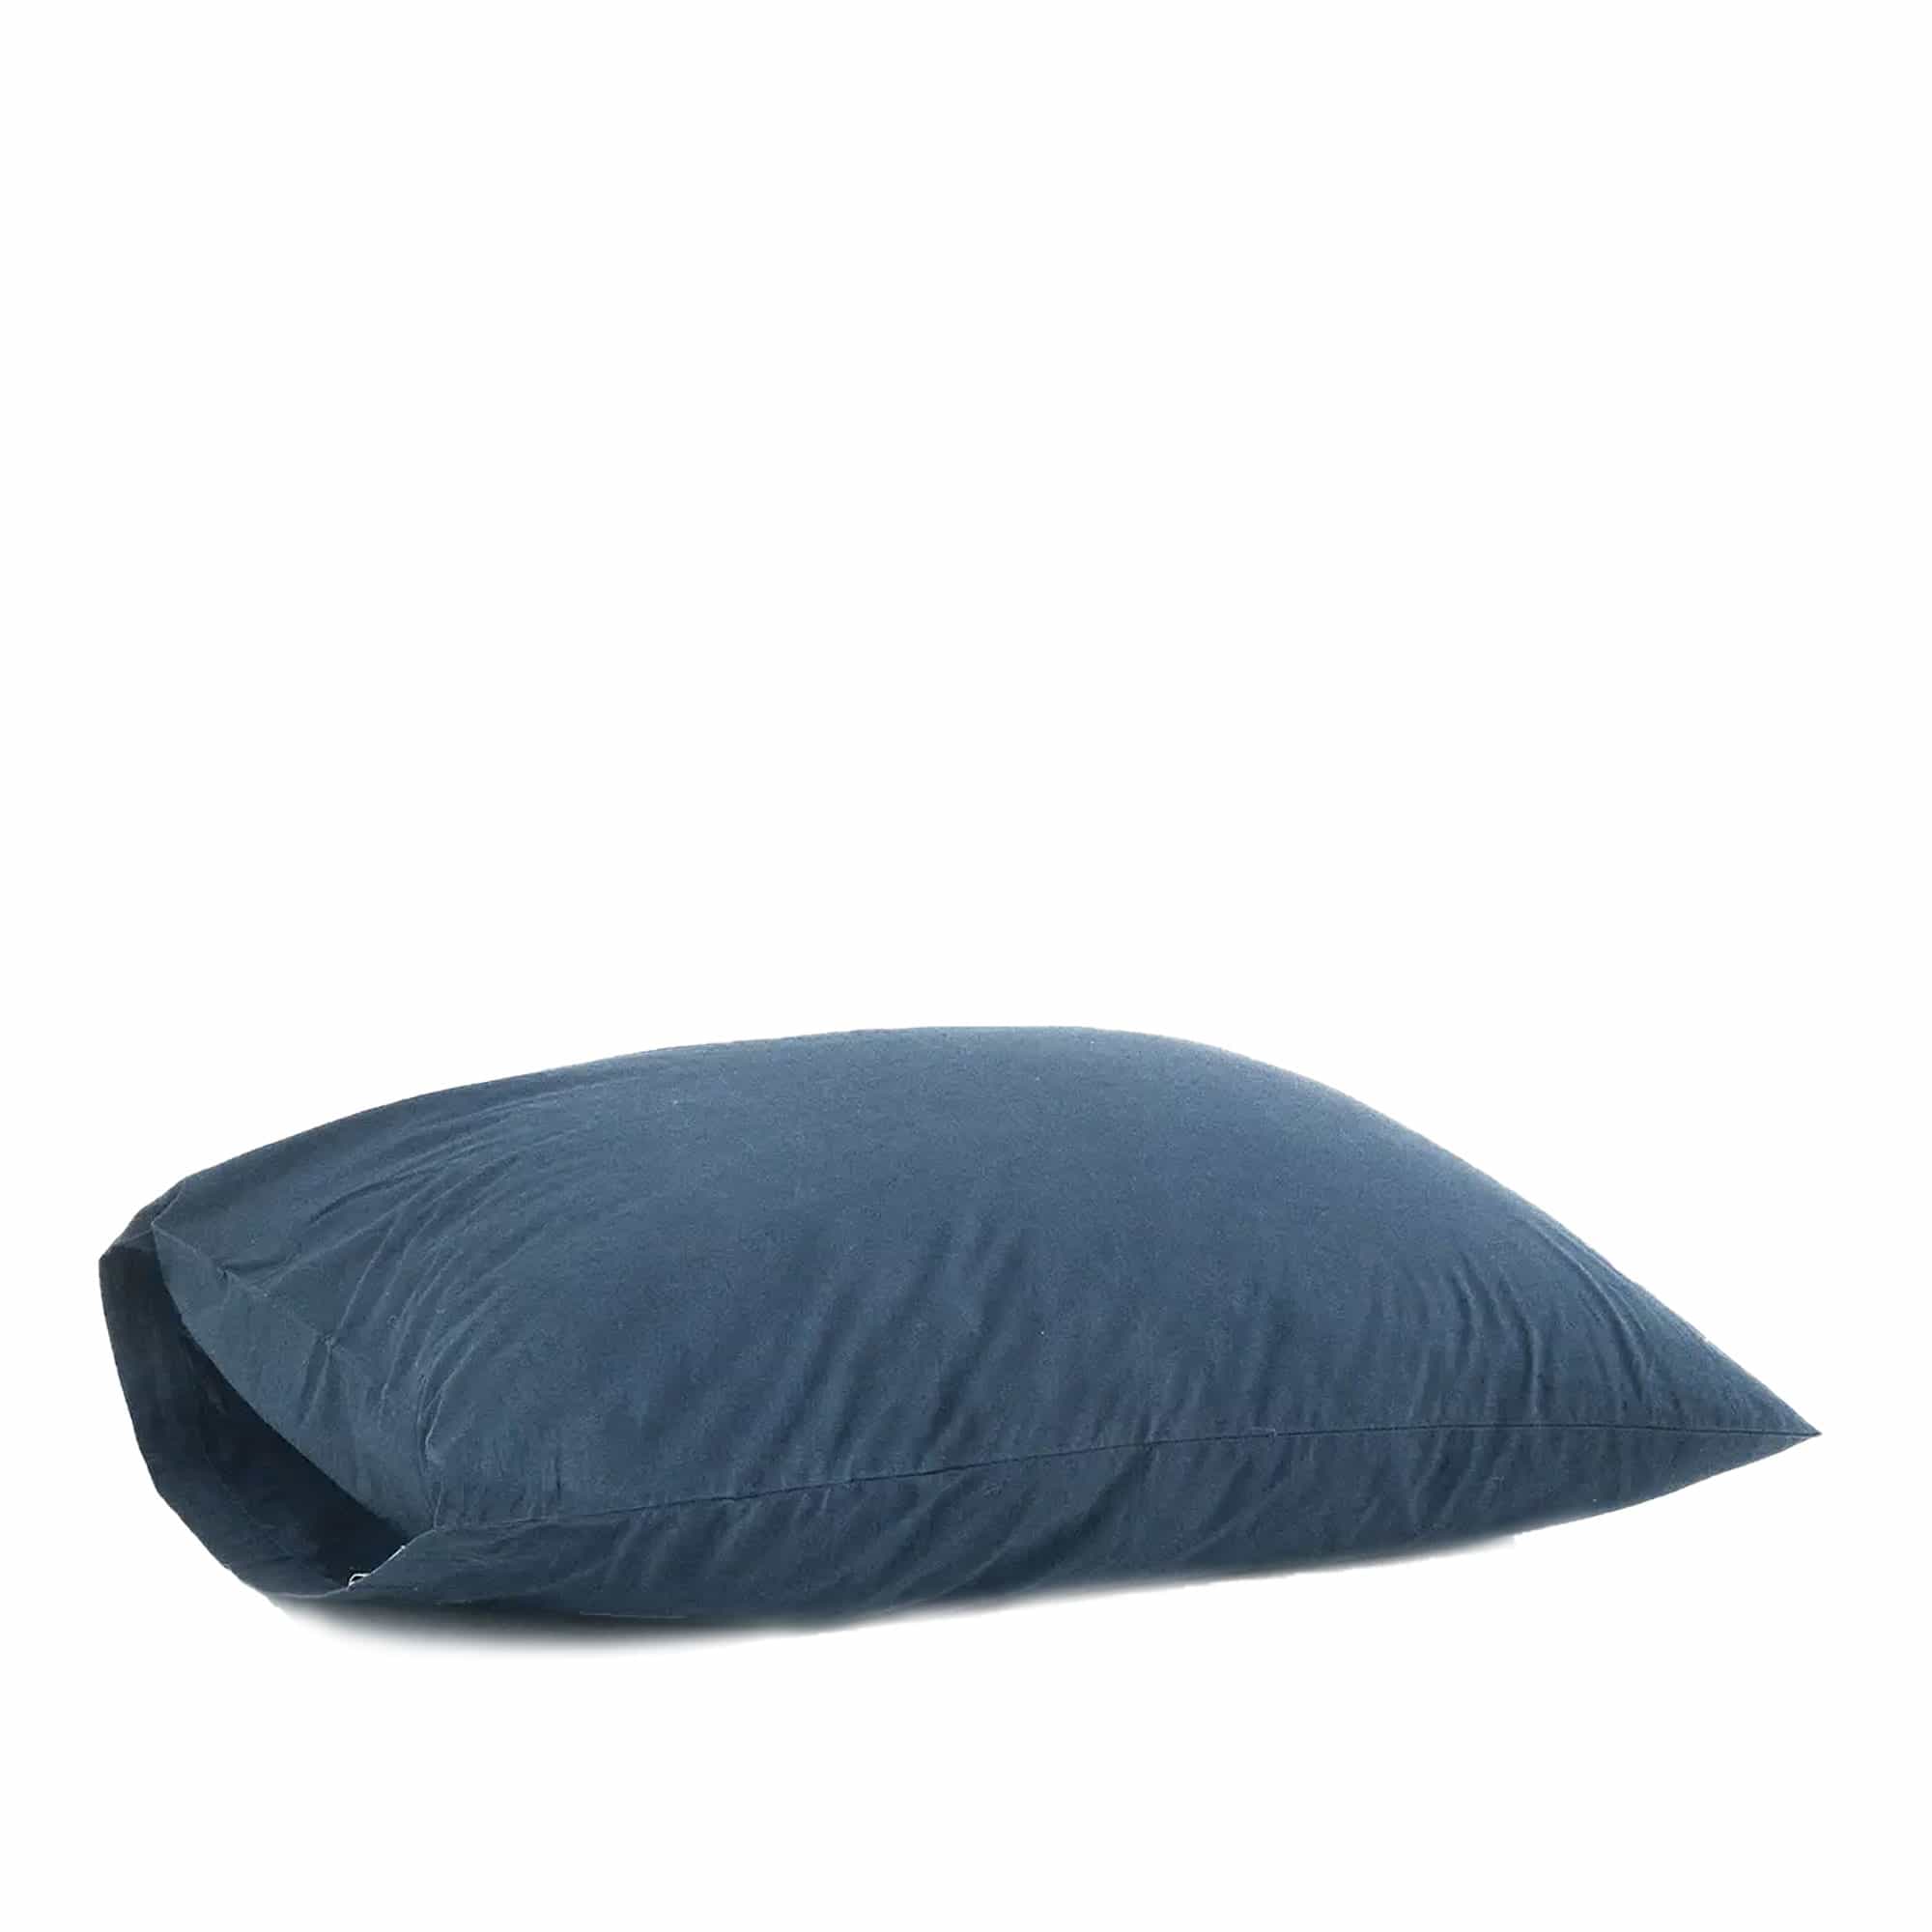 Percale Pillow Case 50 x 60 cm - Midnight Blue